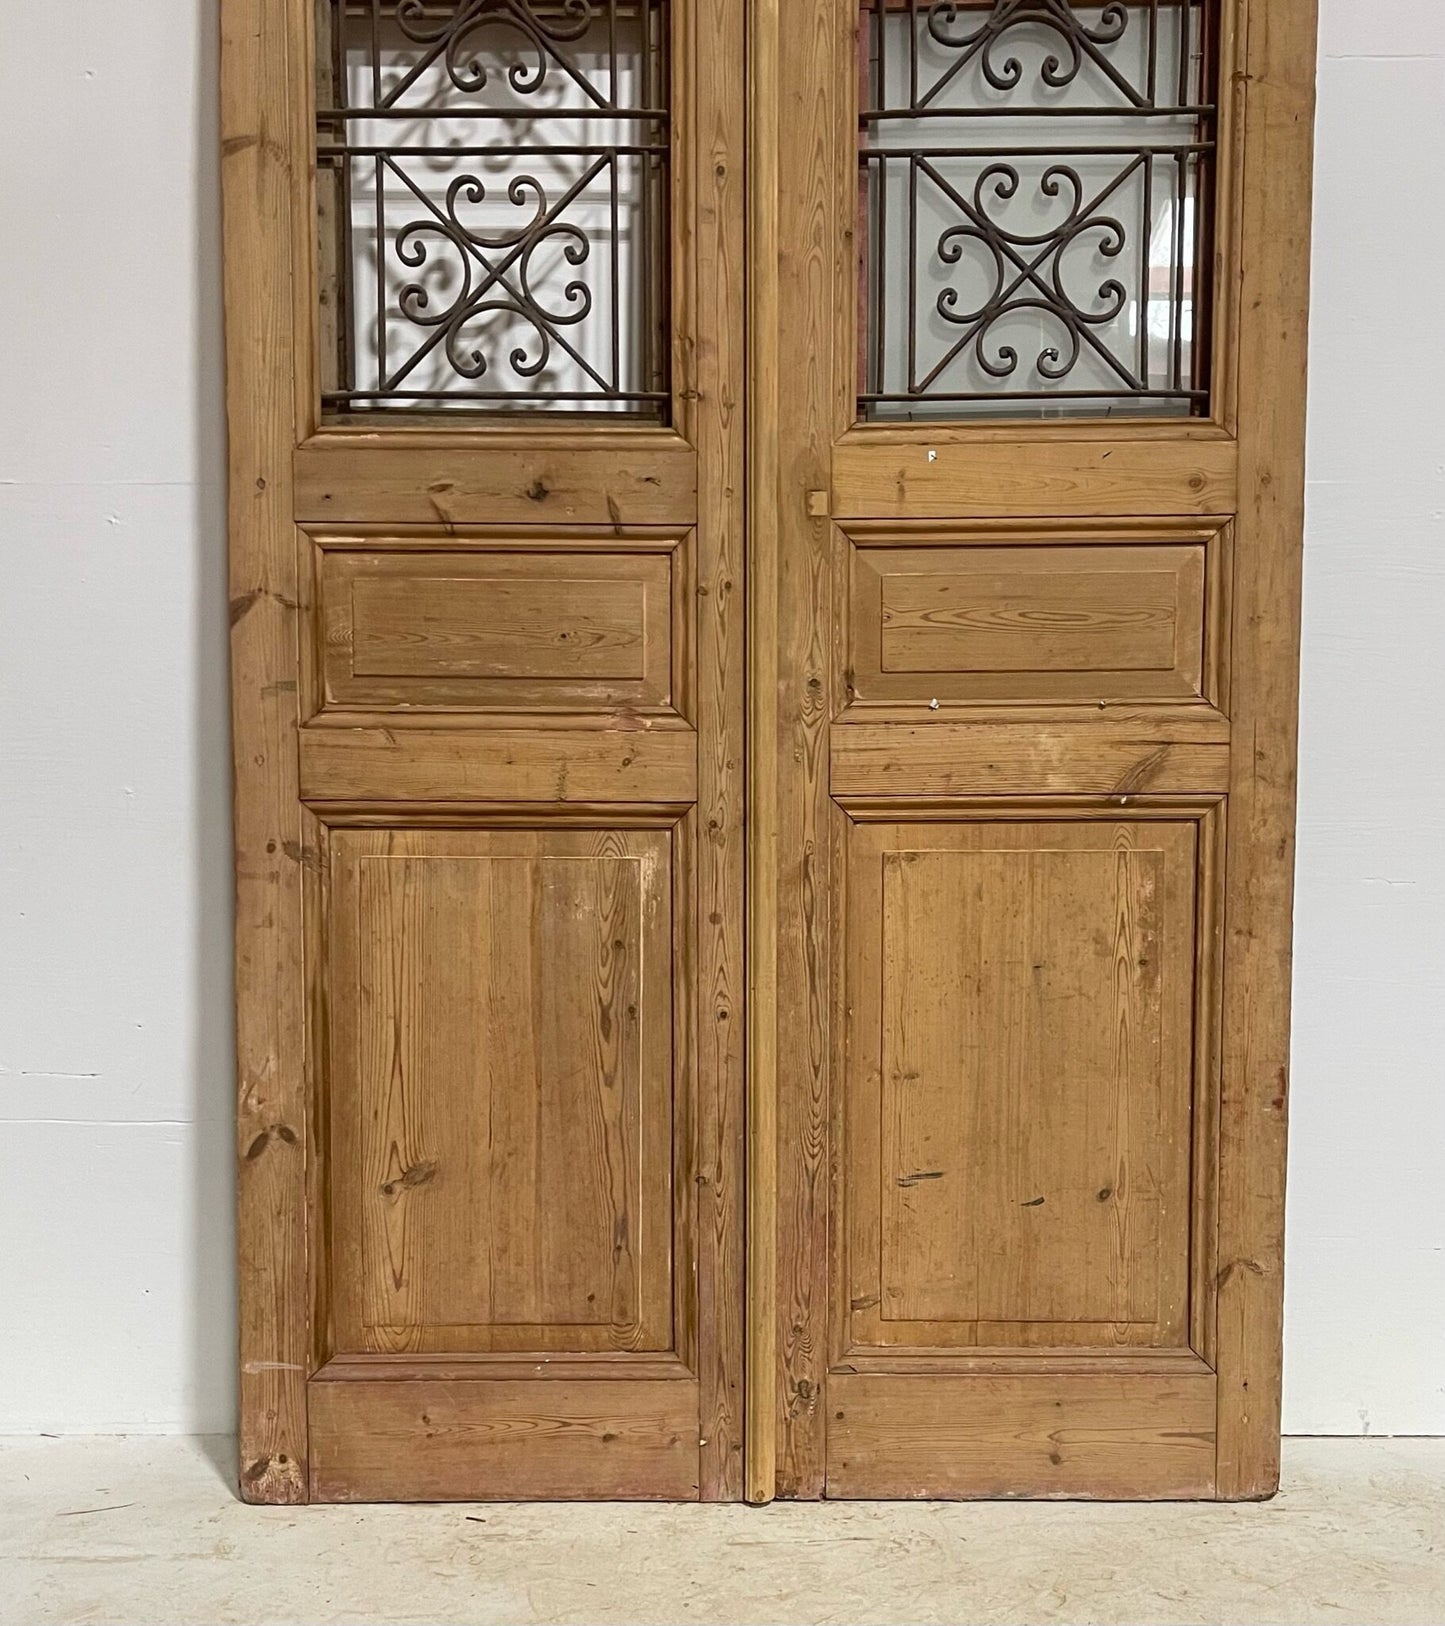 Antique French doors (92.75X48.75) with metal G0981